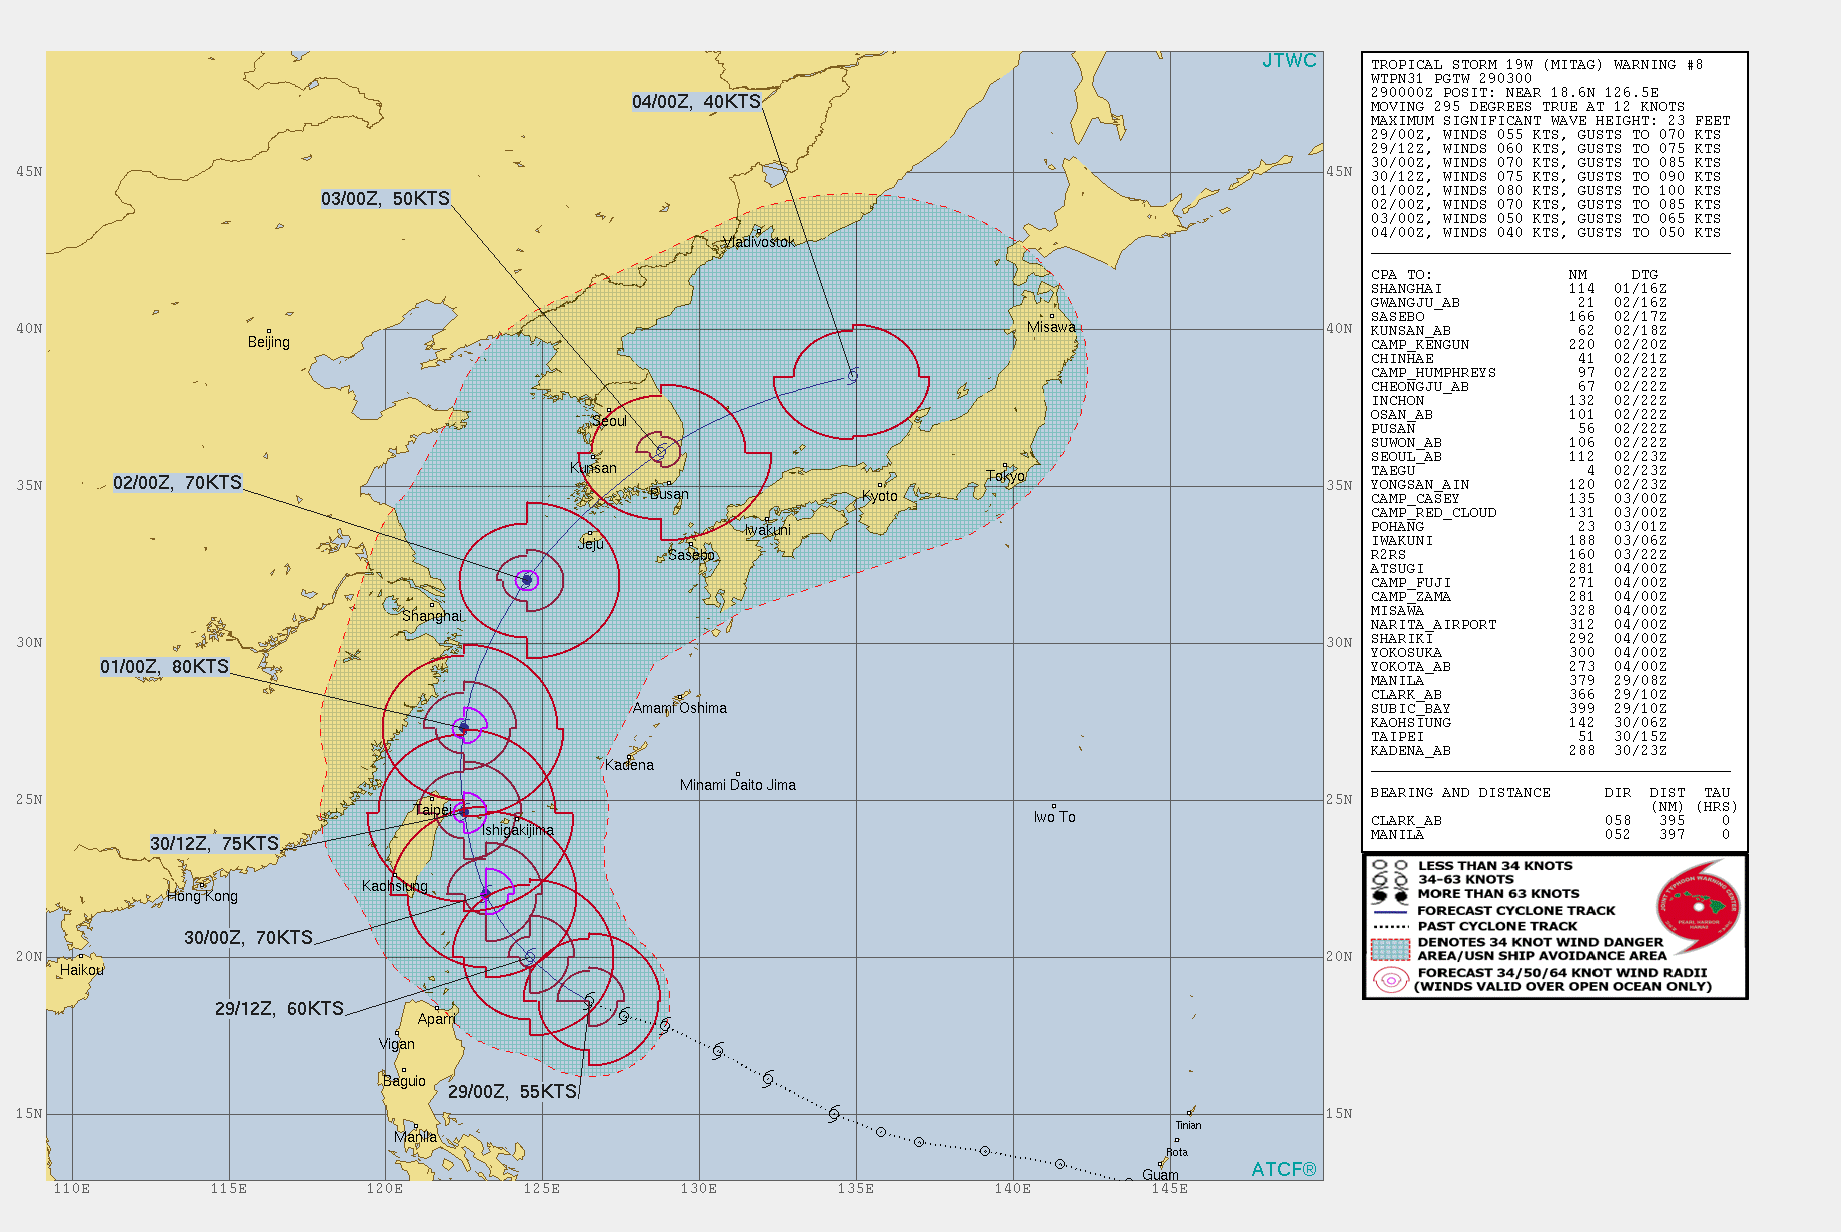 FORECAST TO REACH TYPHOON INTENSITY WITHIN 24H